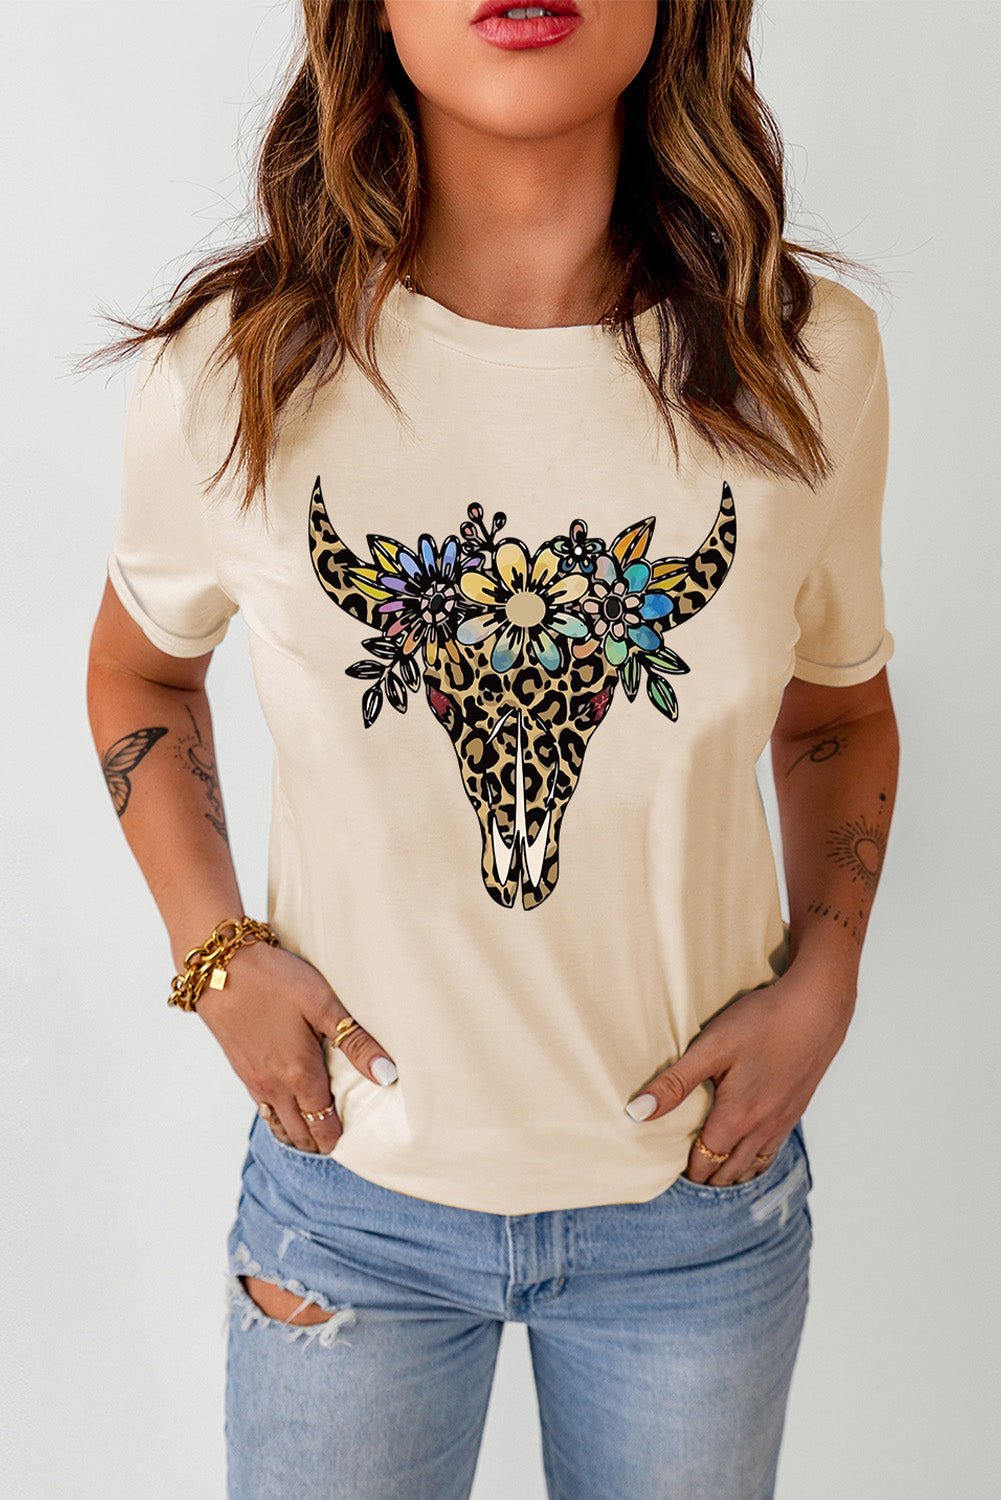 Enchanting Love - Capture Hearts with our Graphic Cuffed Short Sleeve Crewneck Tee - Fall in love with its Chic Style and Mesmerizing DTG Design - Guy Christopher